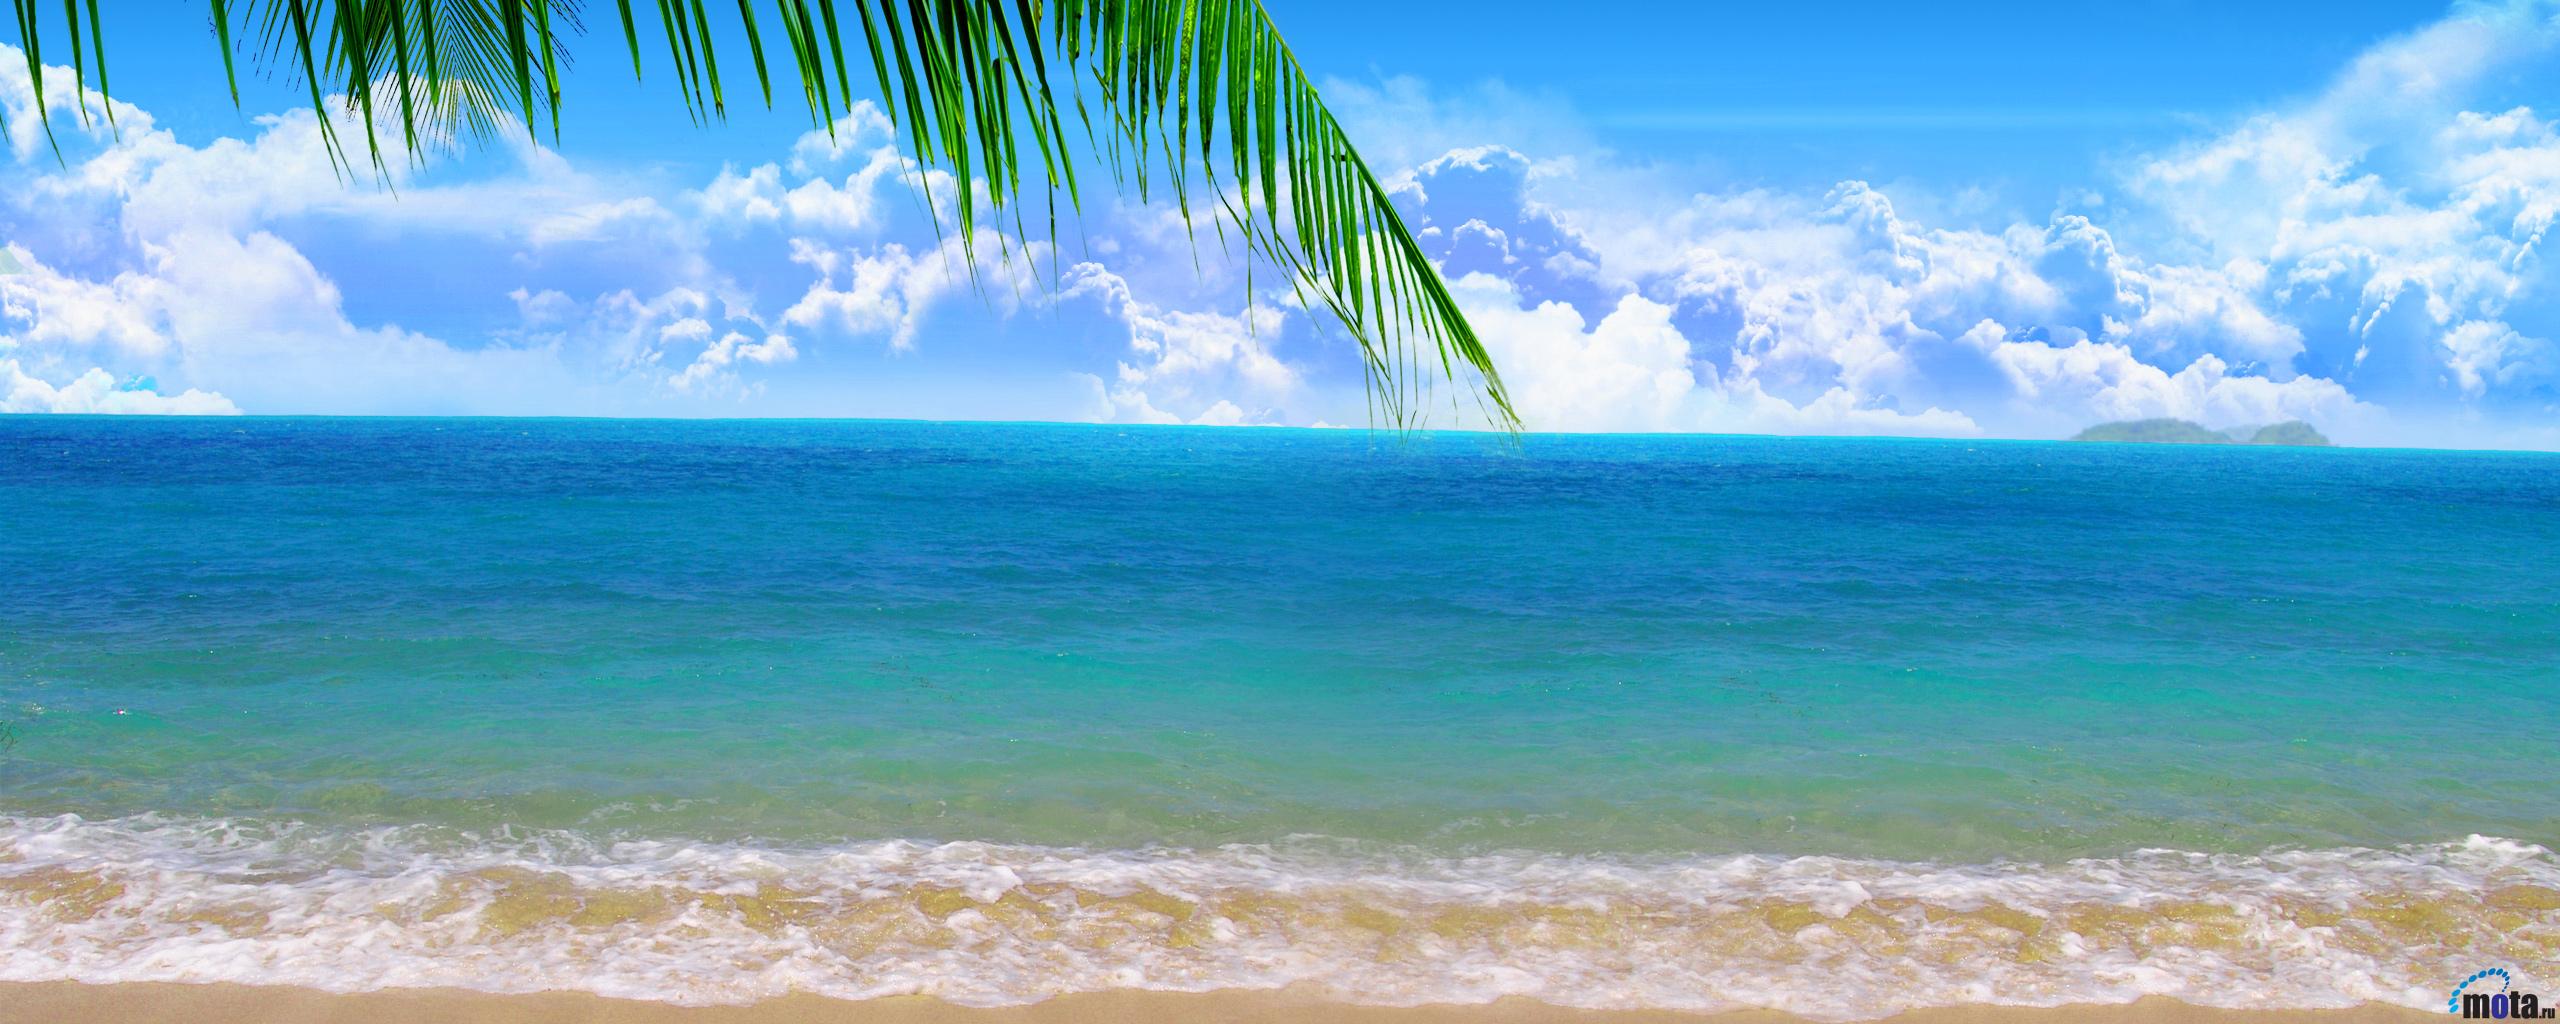 🔥 Download Wallpaper Palm On Paradise Beach X Dual Monitor By